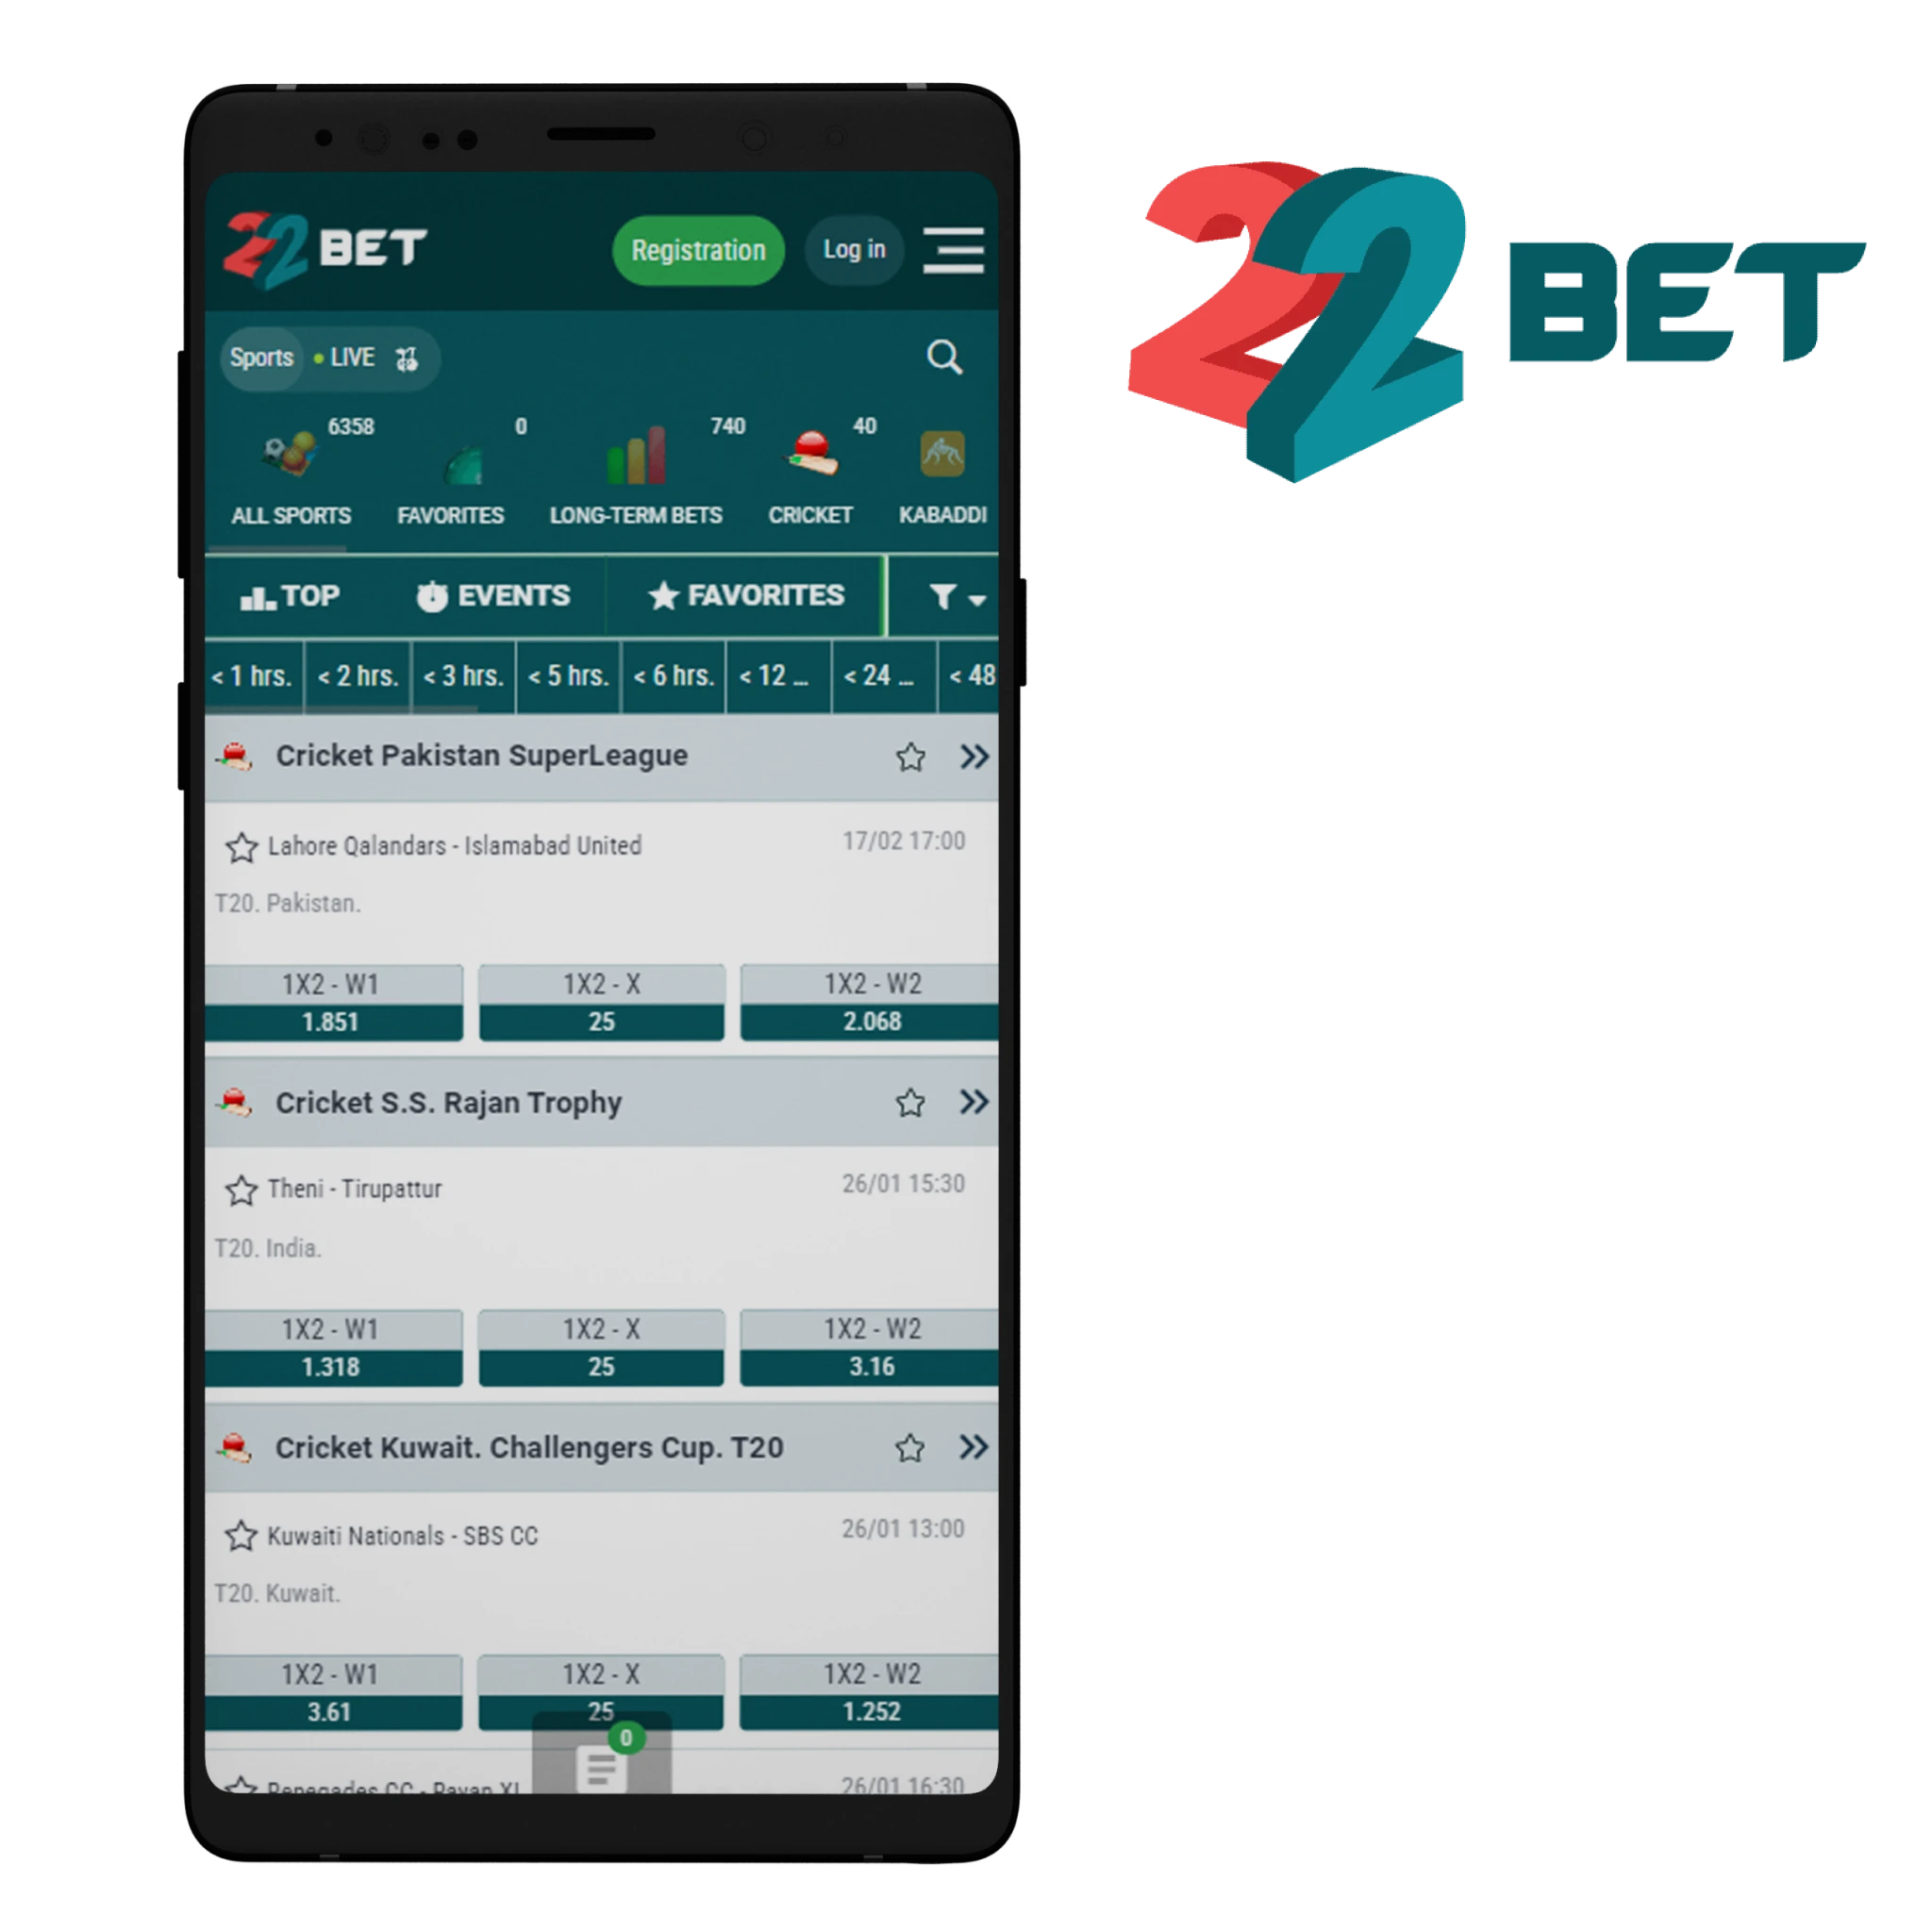 The 22bet mobile app is easy to use even for new cricket bettors.